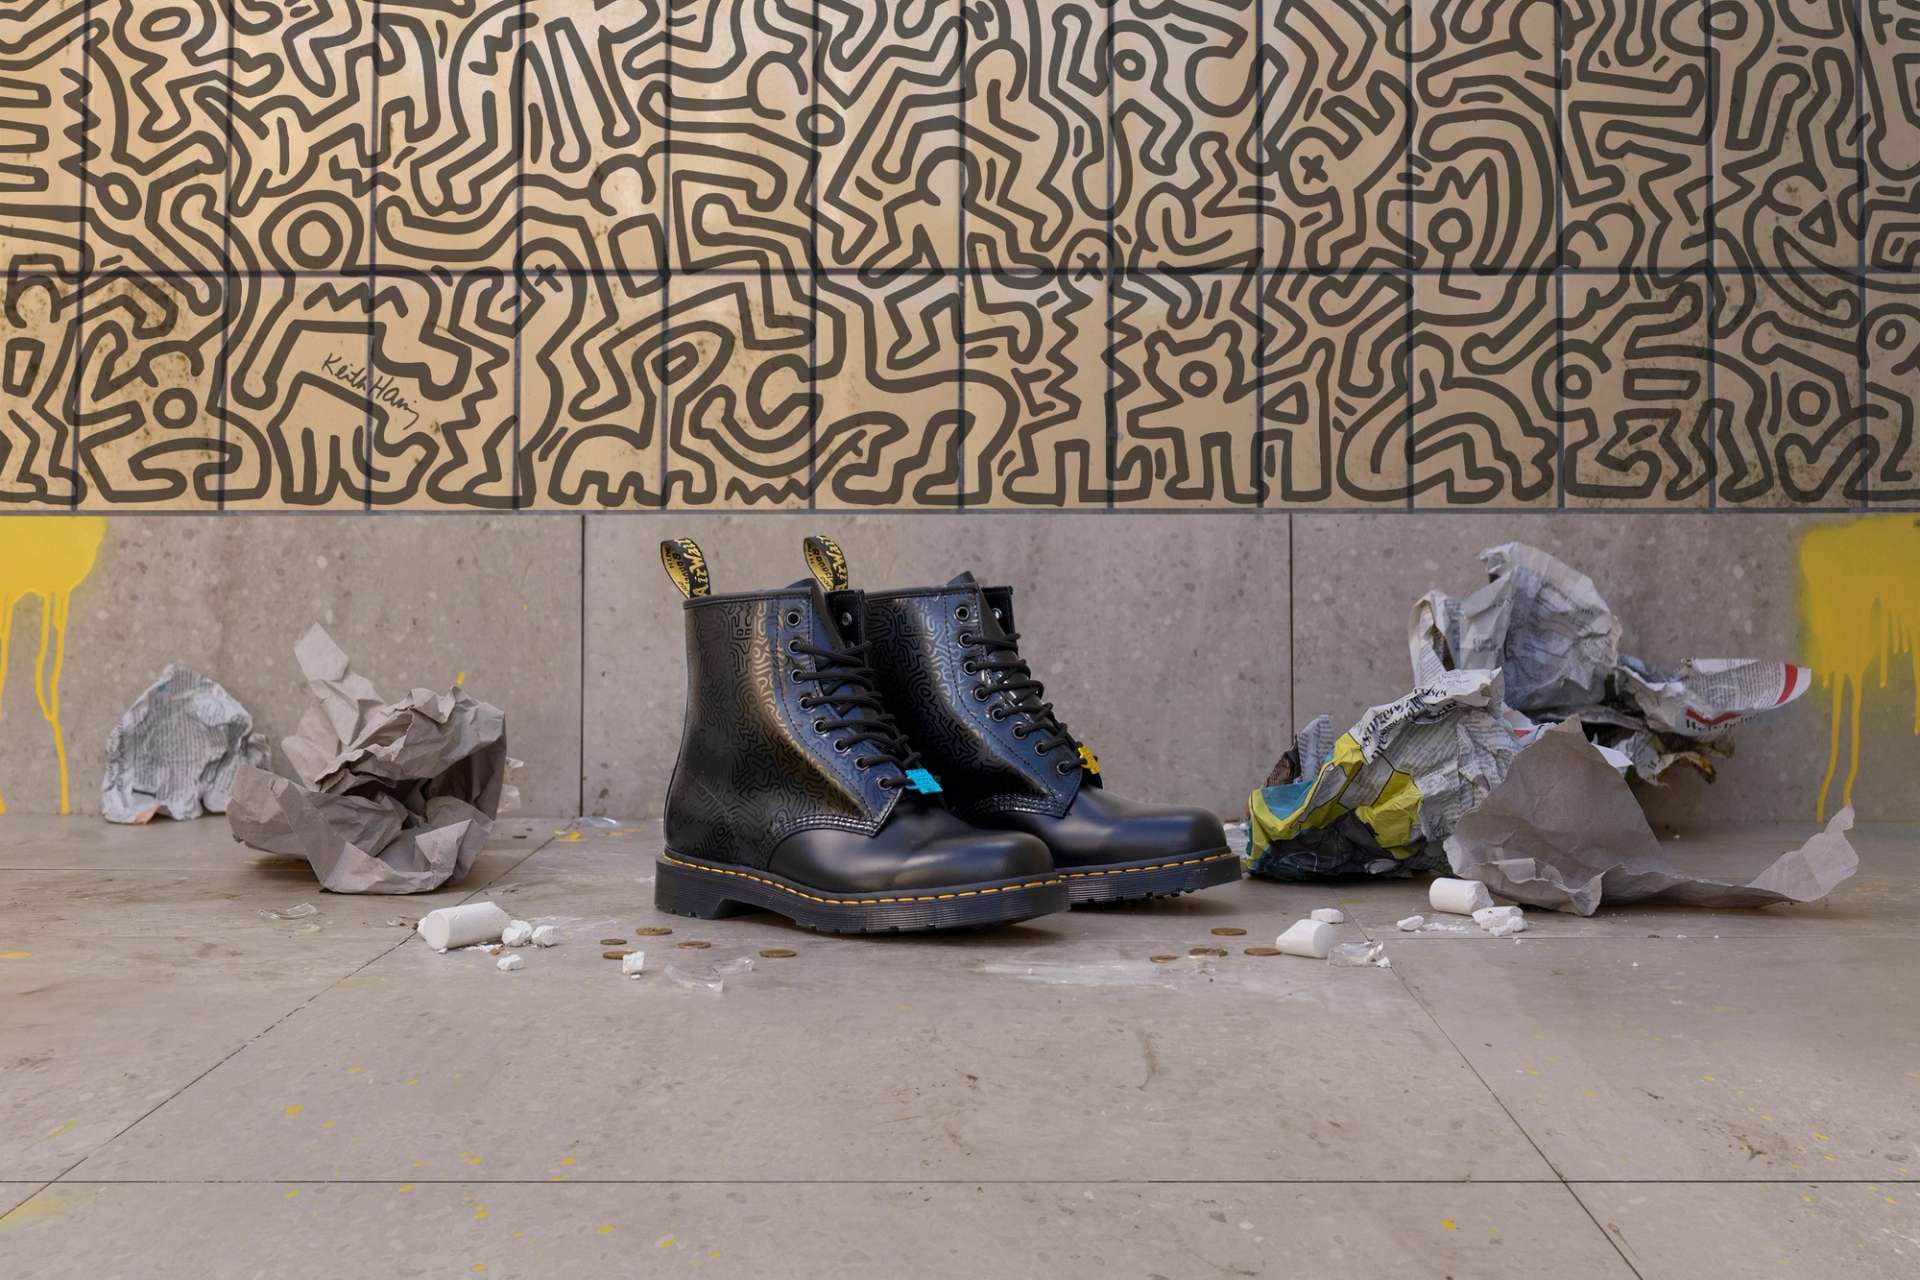 A photograph of a pair of boots from Dr. Martens’ collaboration with Keith Haring, placed against a background featuring one of the artist’s iconic murals.